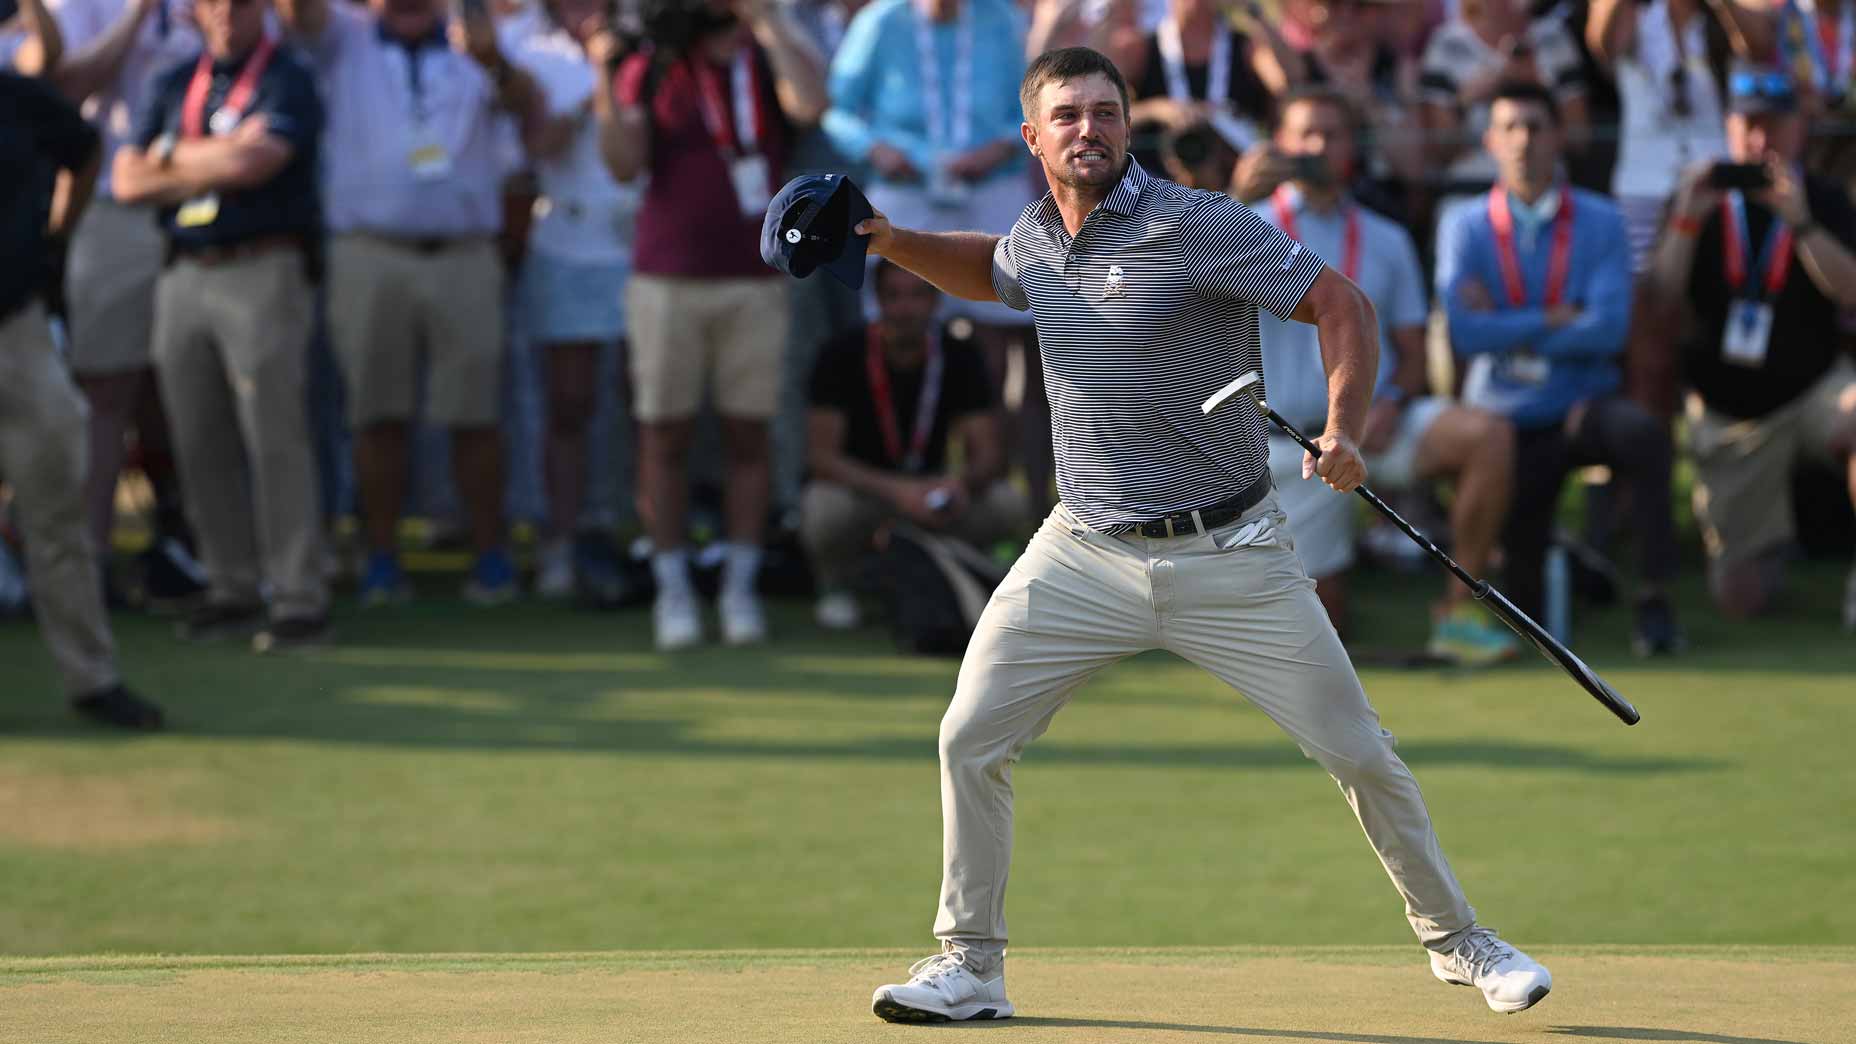 Bryson DeChambeau wins US Open after Rory McIlroy's late collapse